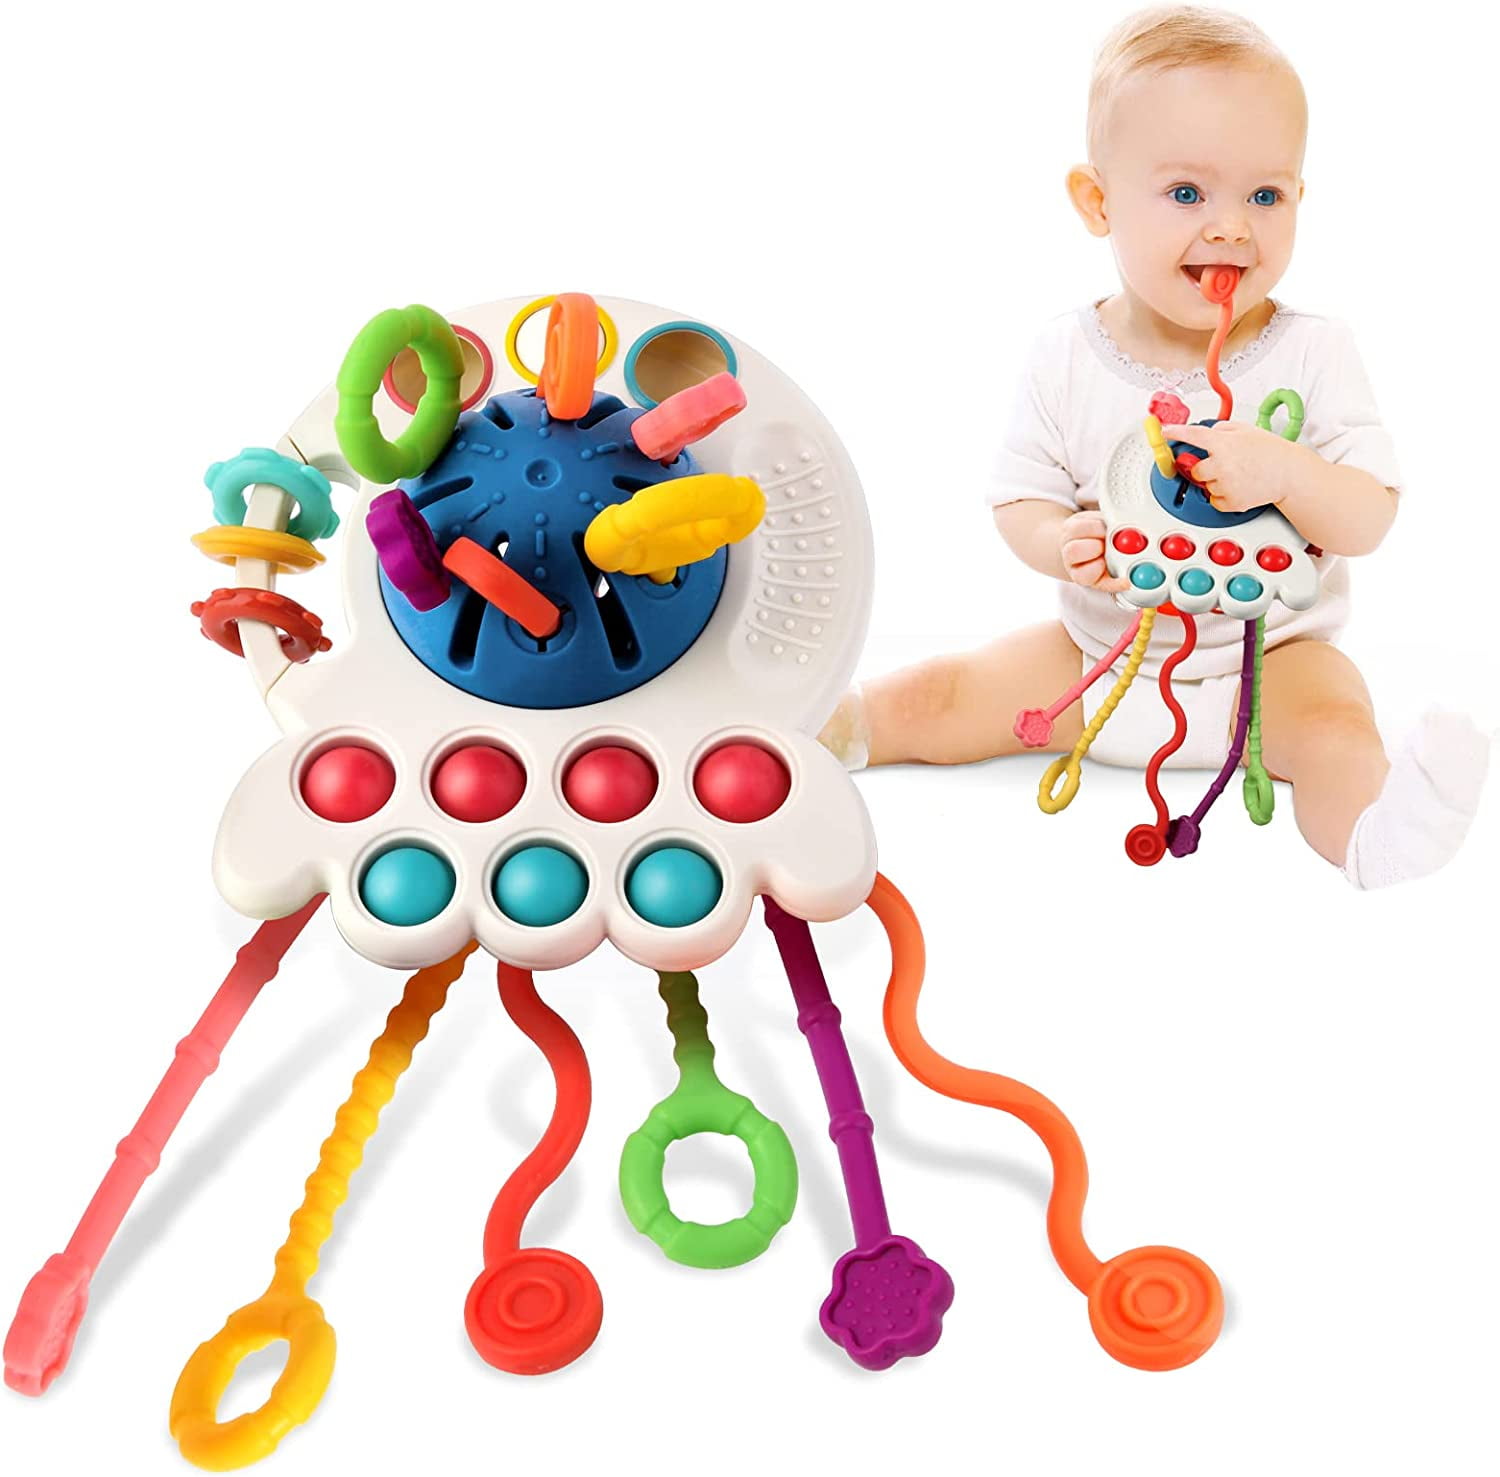 Baby Toys For 18 Months Montessori